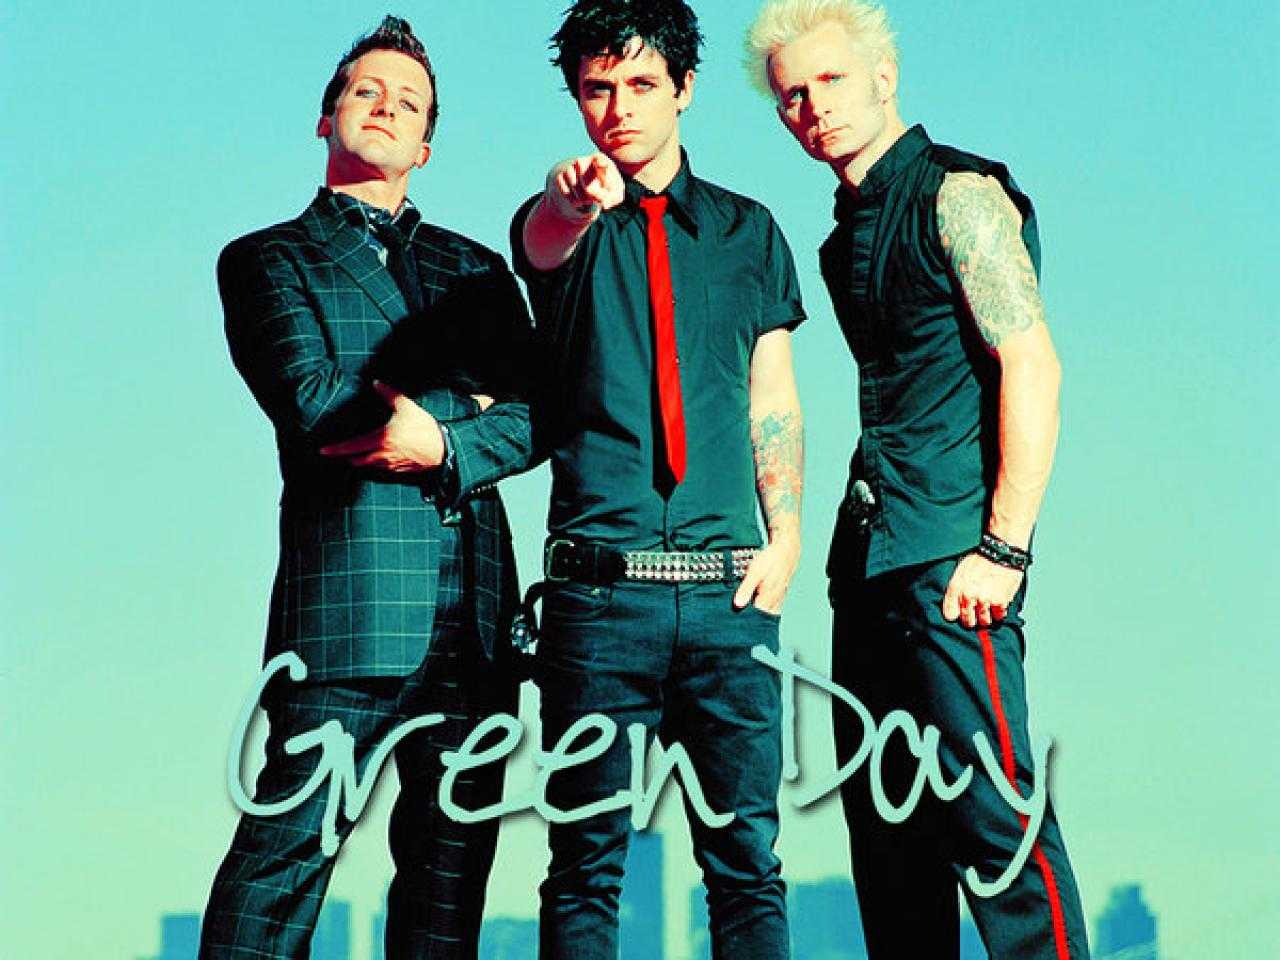 Greenday hoescover. 